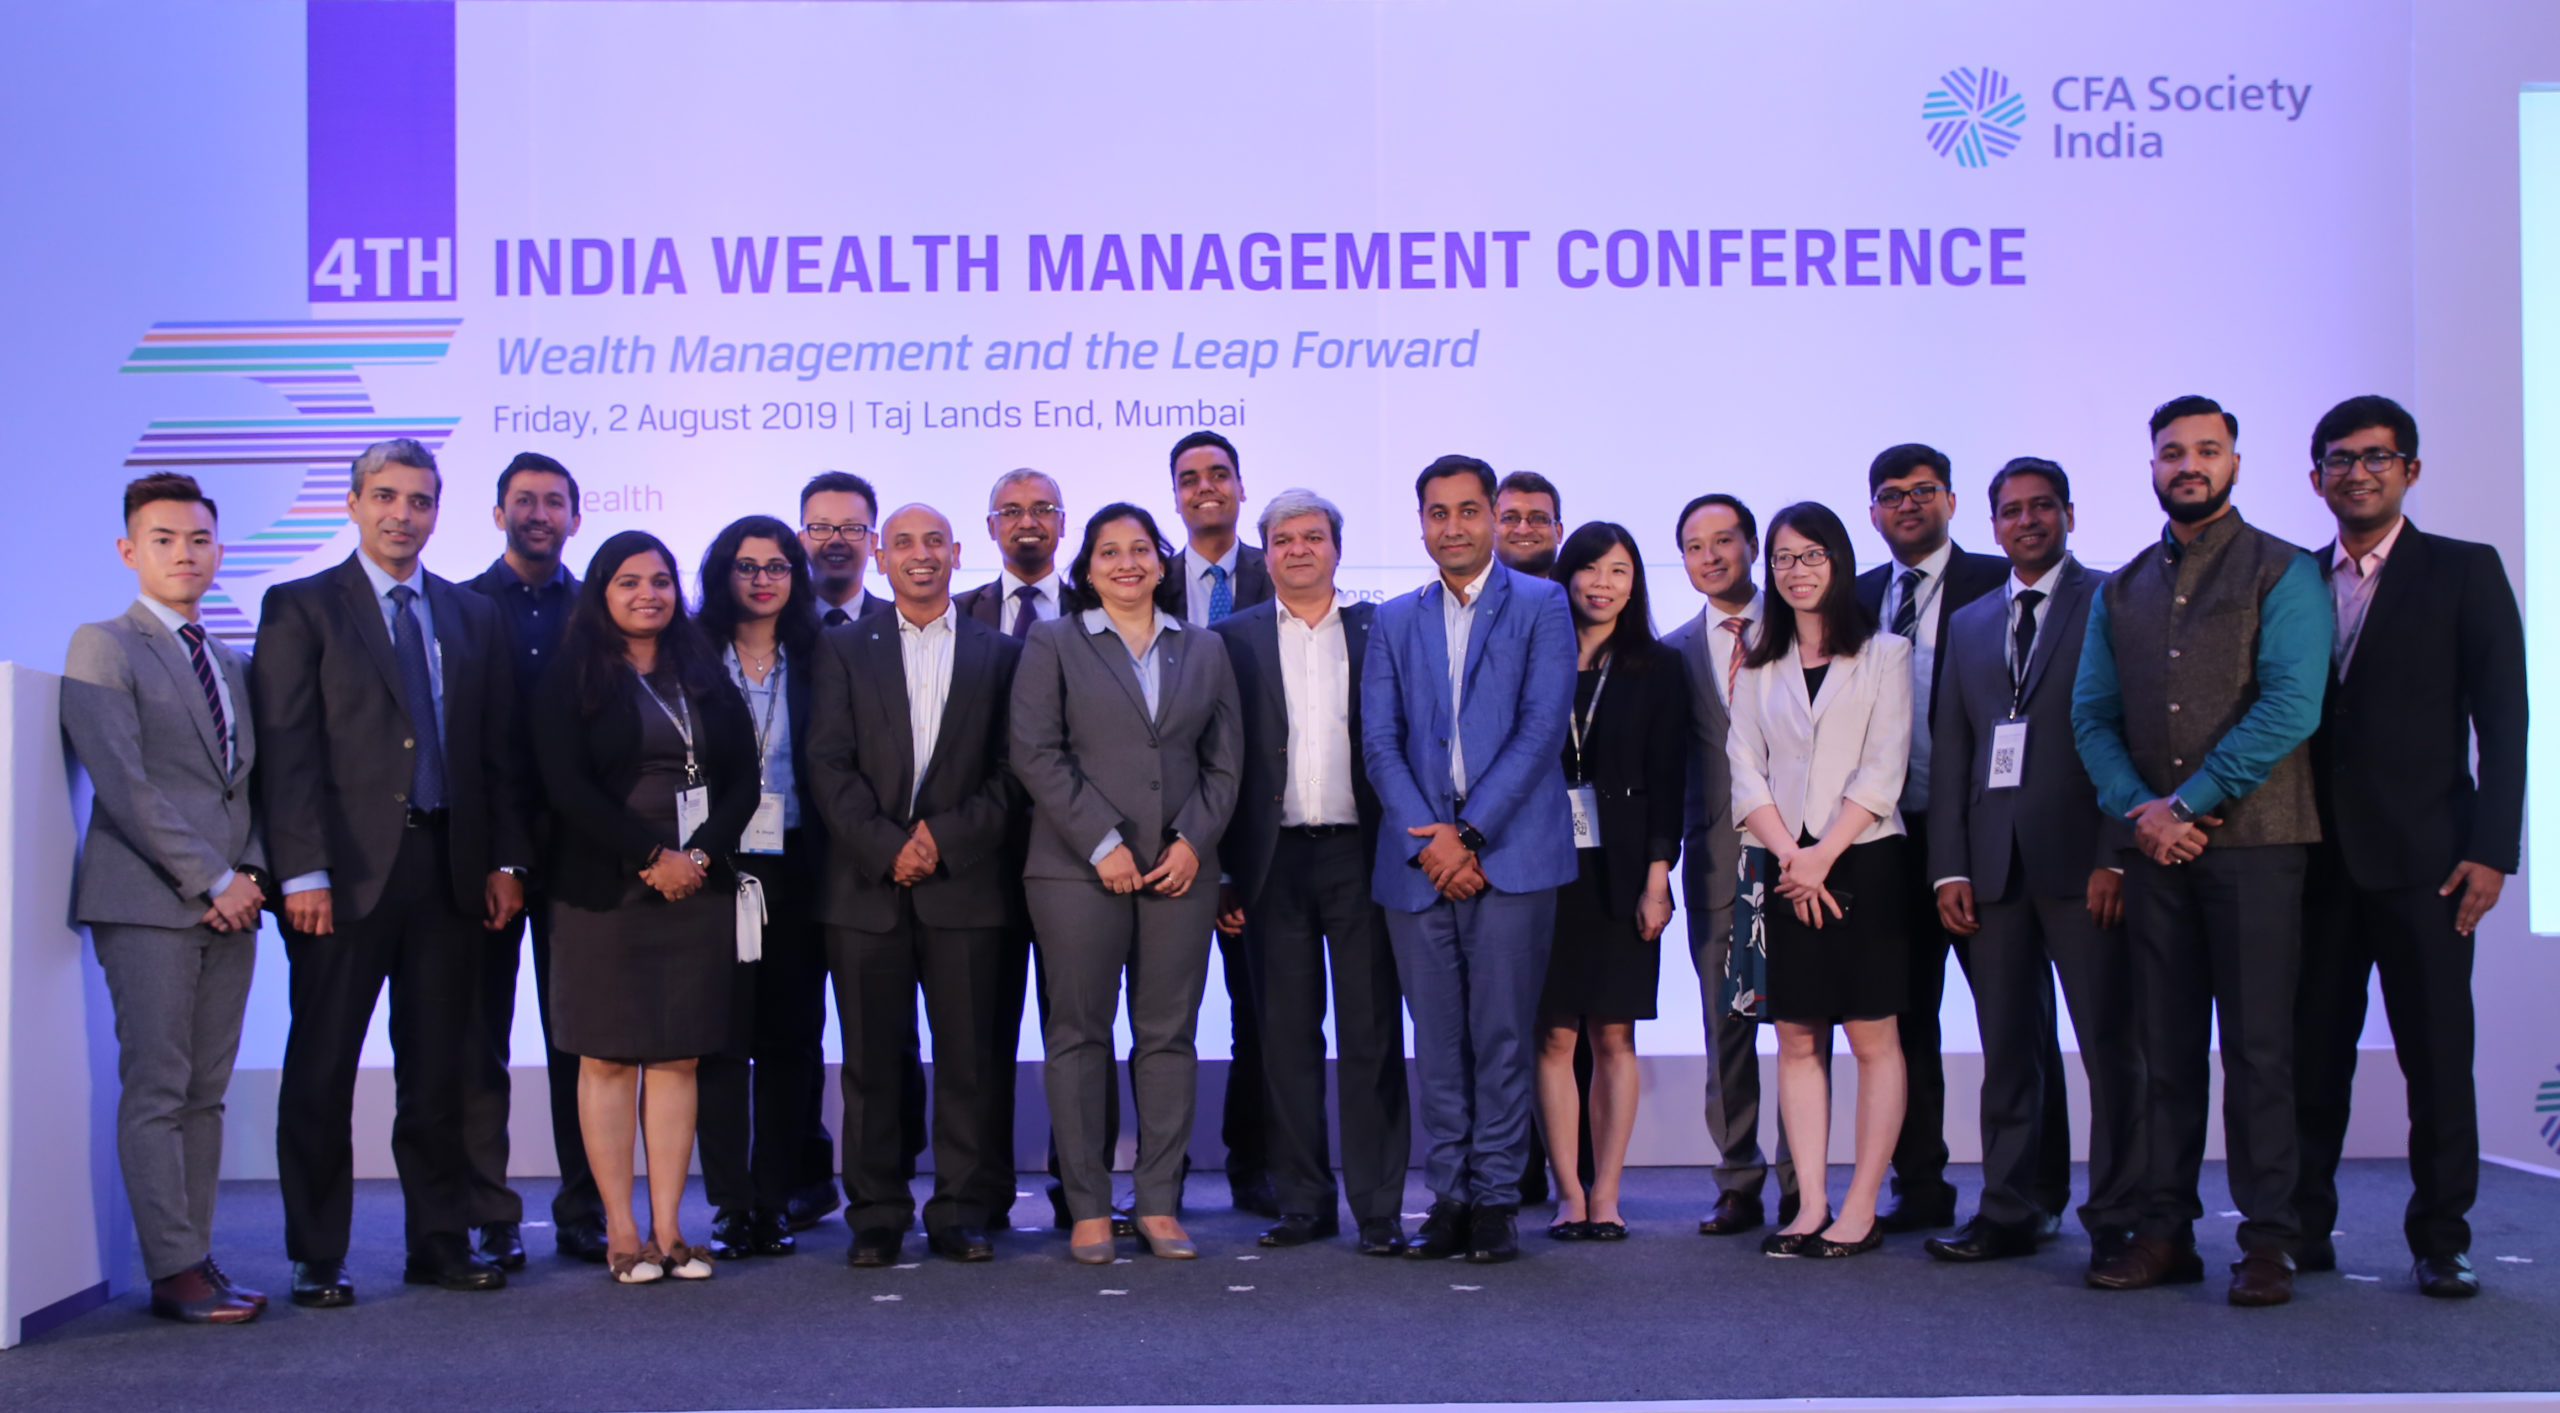 4th India Wealth Management Conference, 2019